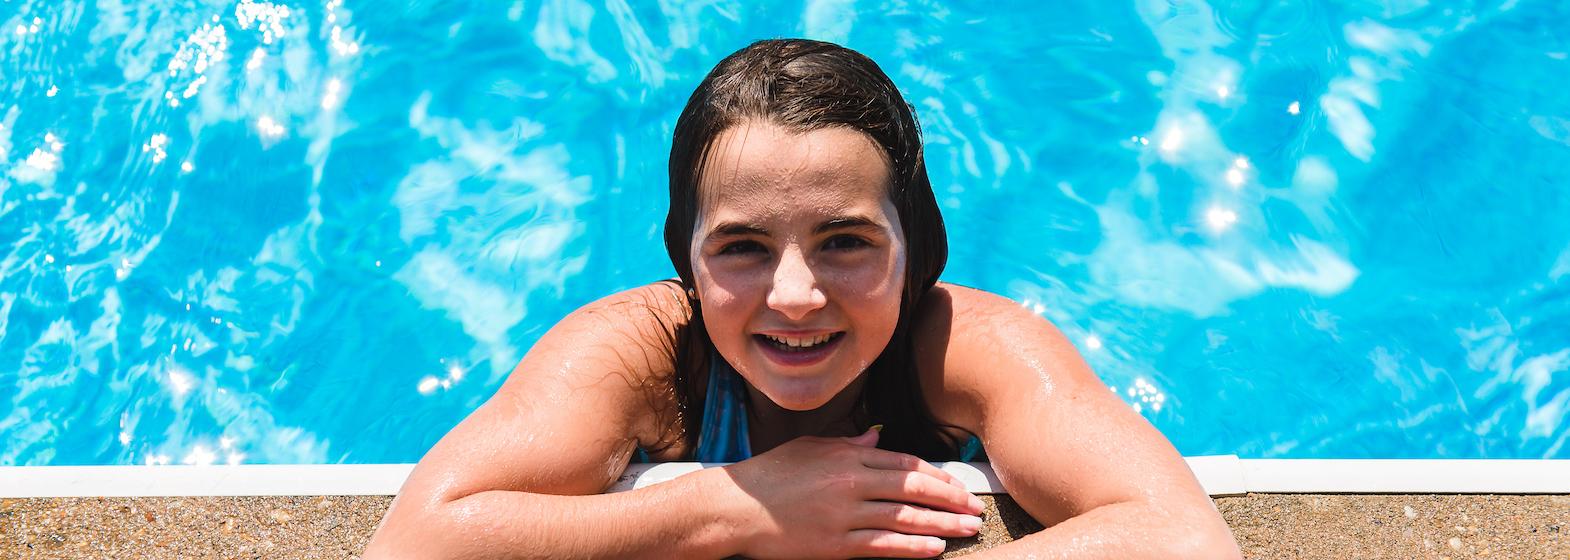 Image of Pool Scouts Partners with Hope Floats to Bring Nearly 800 Swim Lessons to Children